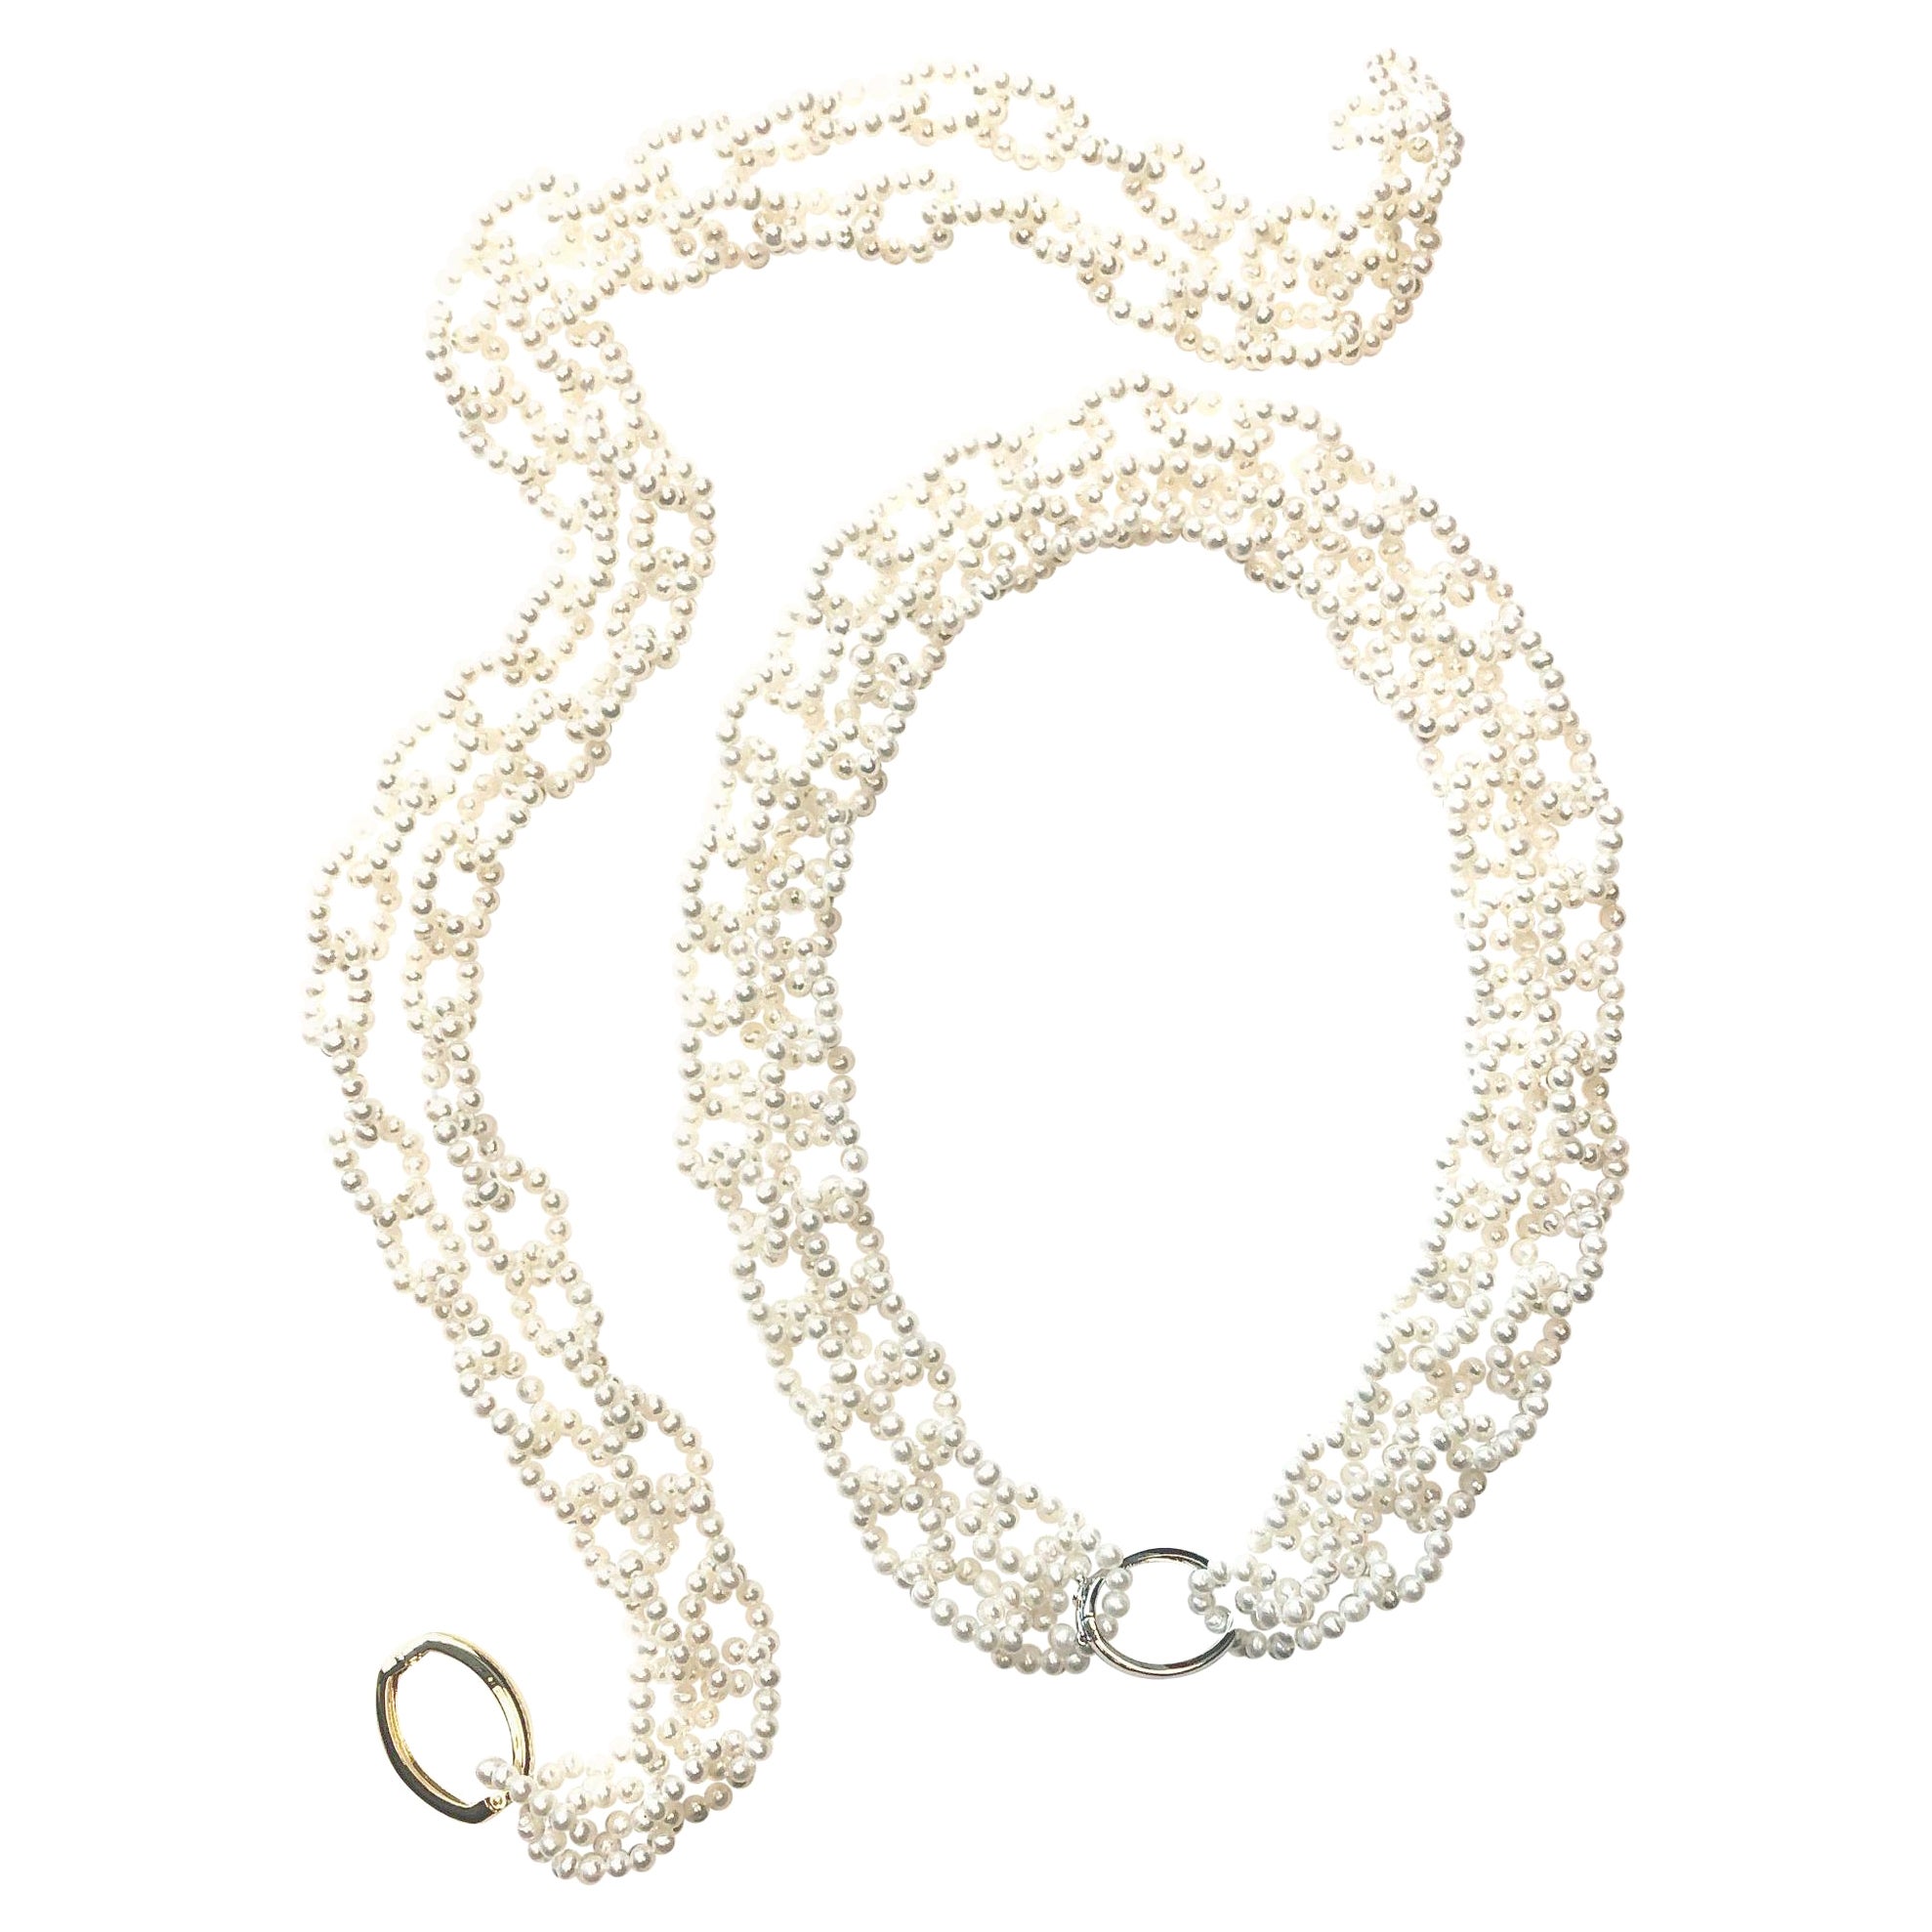 36-Inch White Pearl "Open Chain Link" Necklace with Silver Toned Clasp